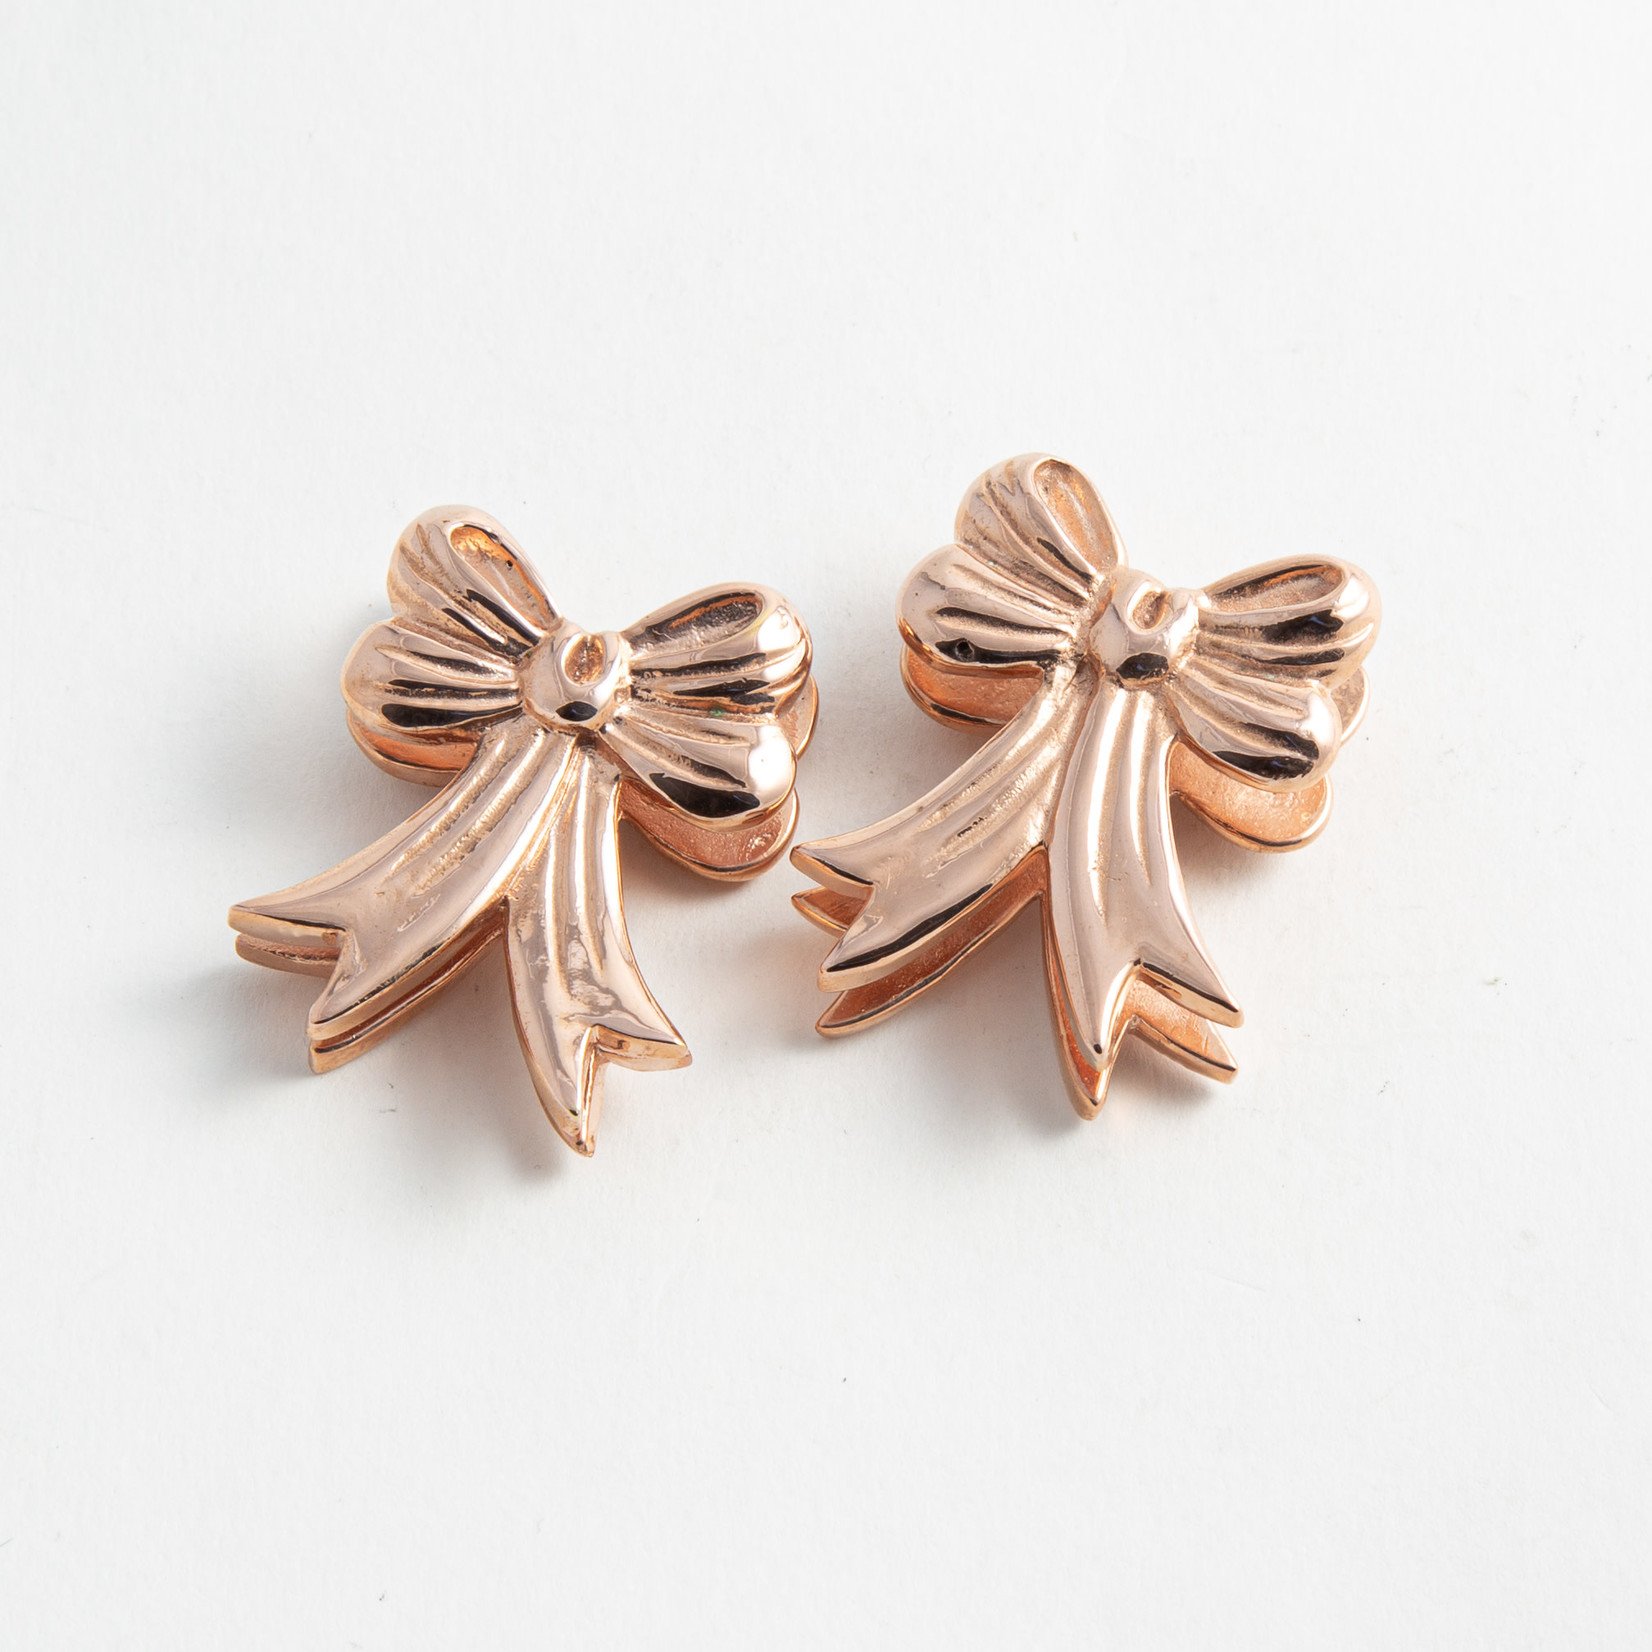 Buddha Jewelry Organics Buddha Jewelry Organics Rose Gold plate XL Bow Weights